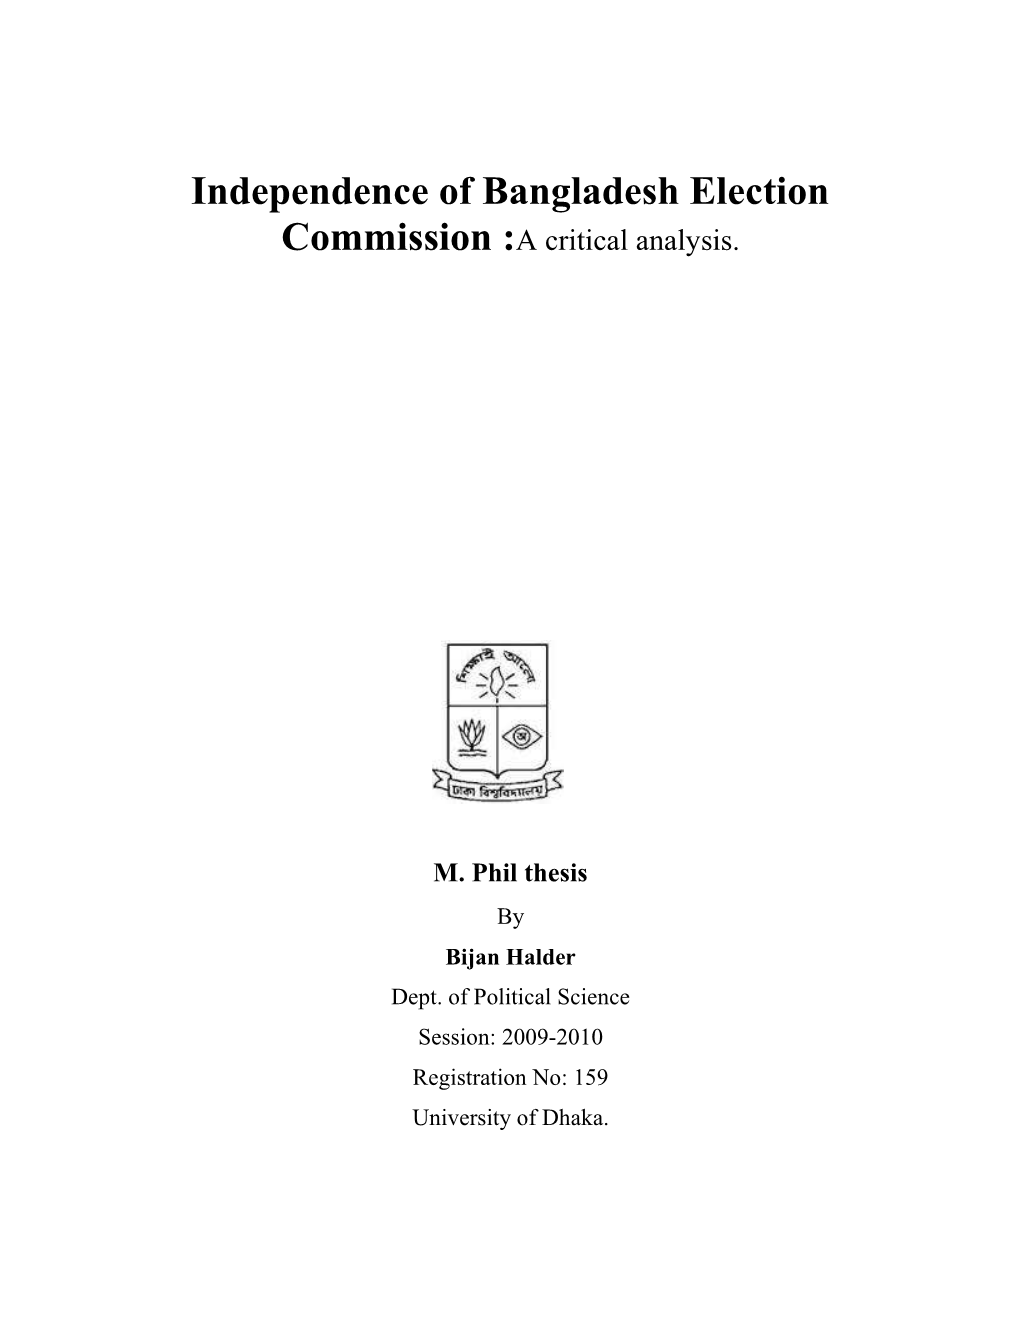 Independence of Bangladesh Election Commission :A Critical Analysis